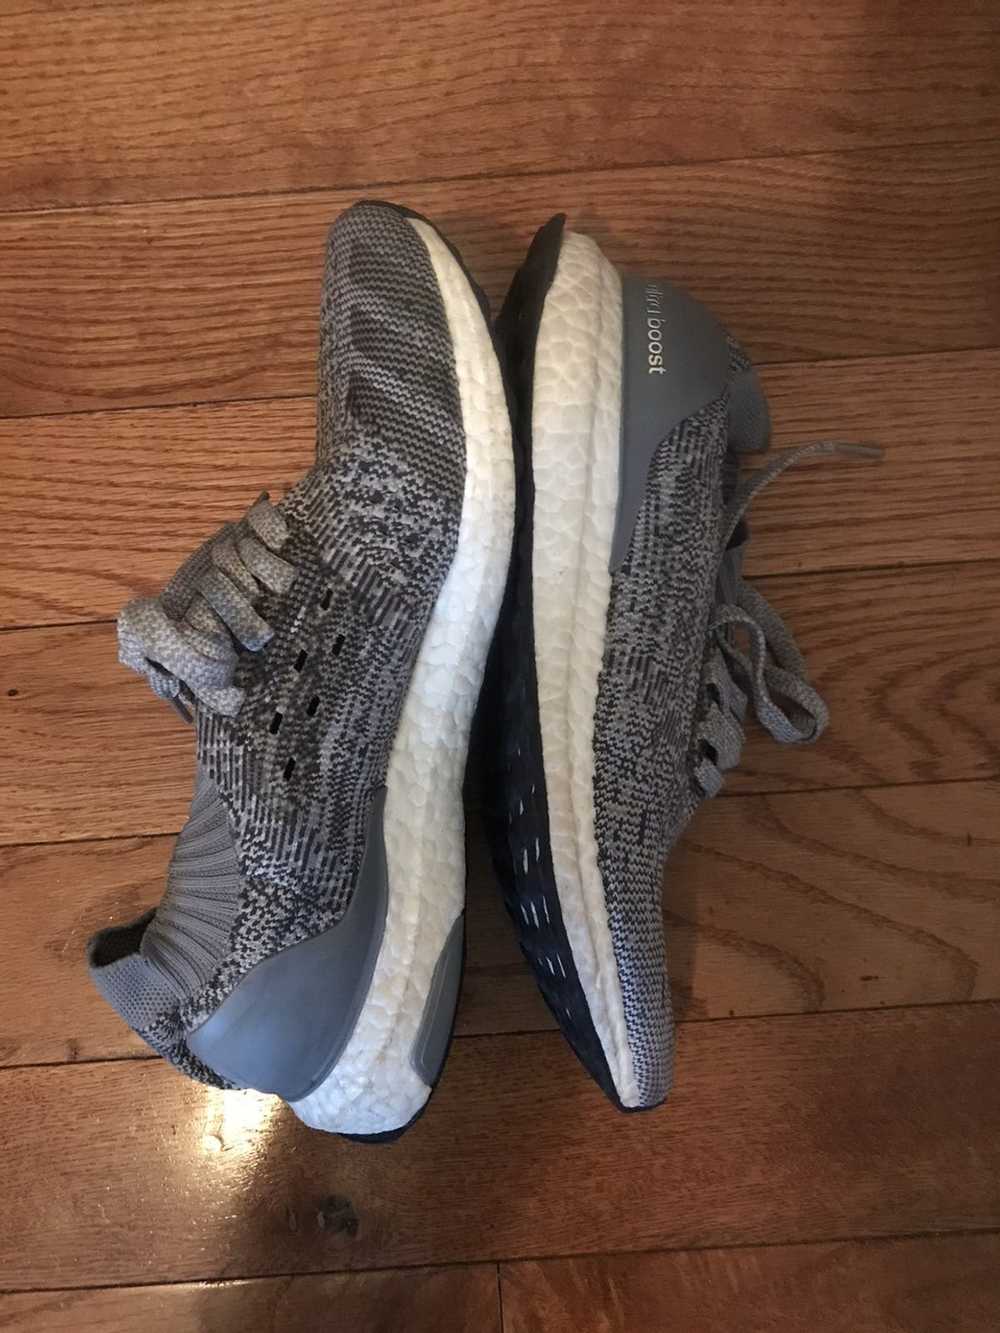 Adidas Ultra boost uncaged - image 2